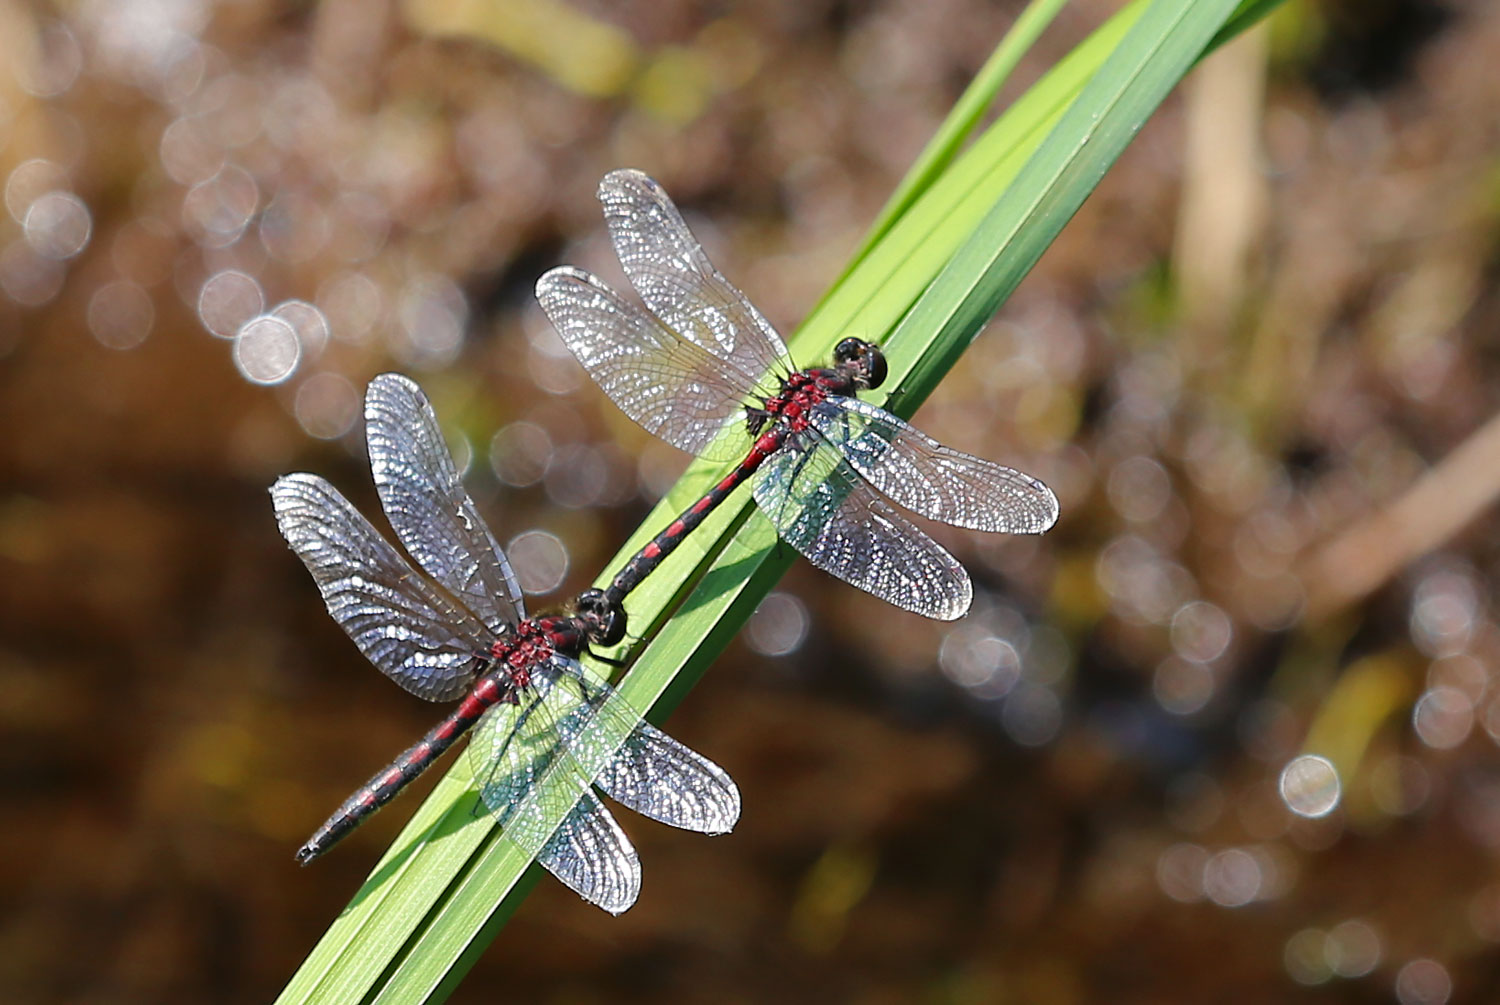 Hudsonian whiteface dragonflies ( Leucorrhinia hudsonica  ) in the tandem position. 